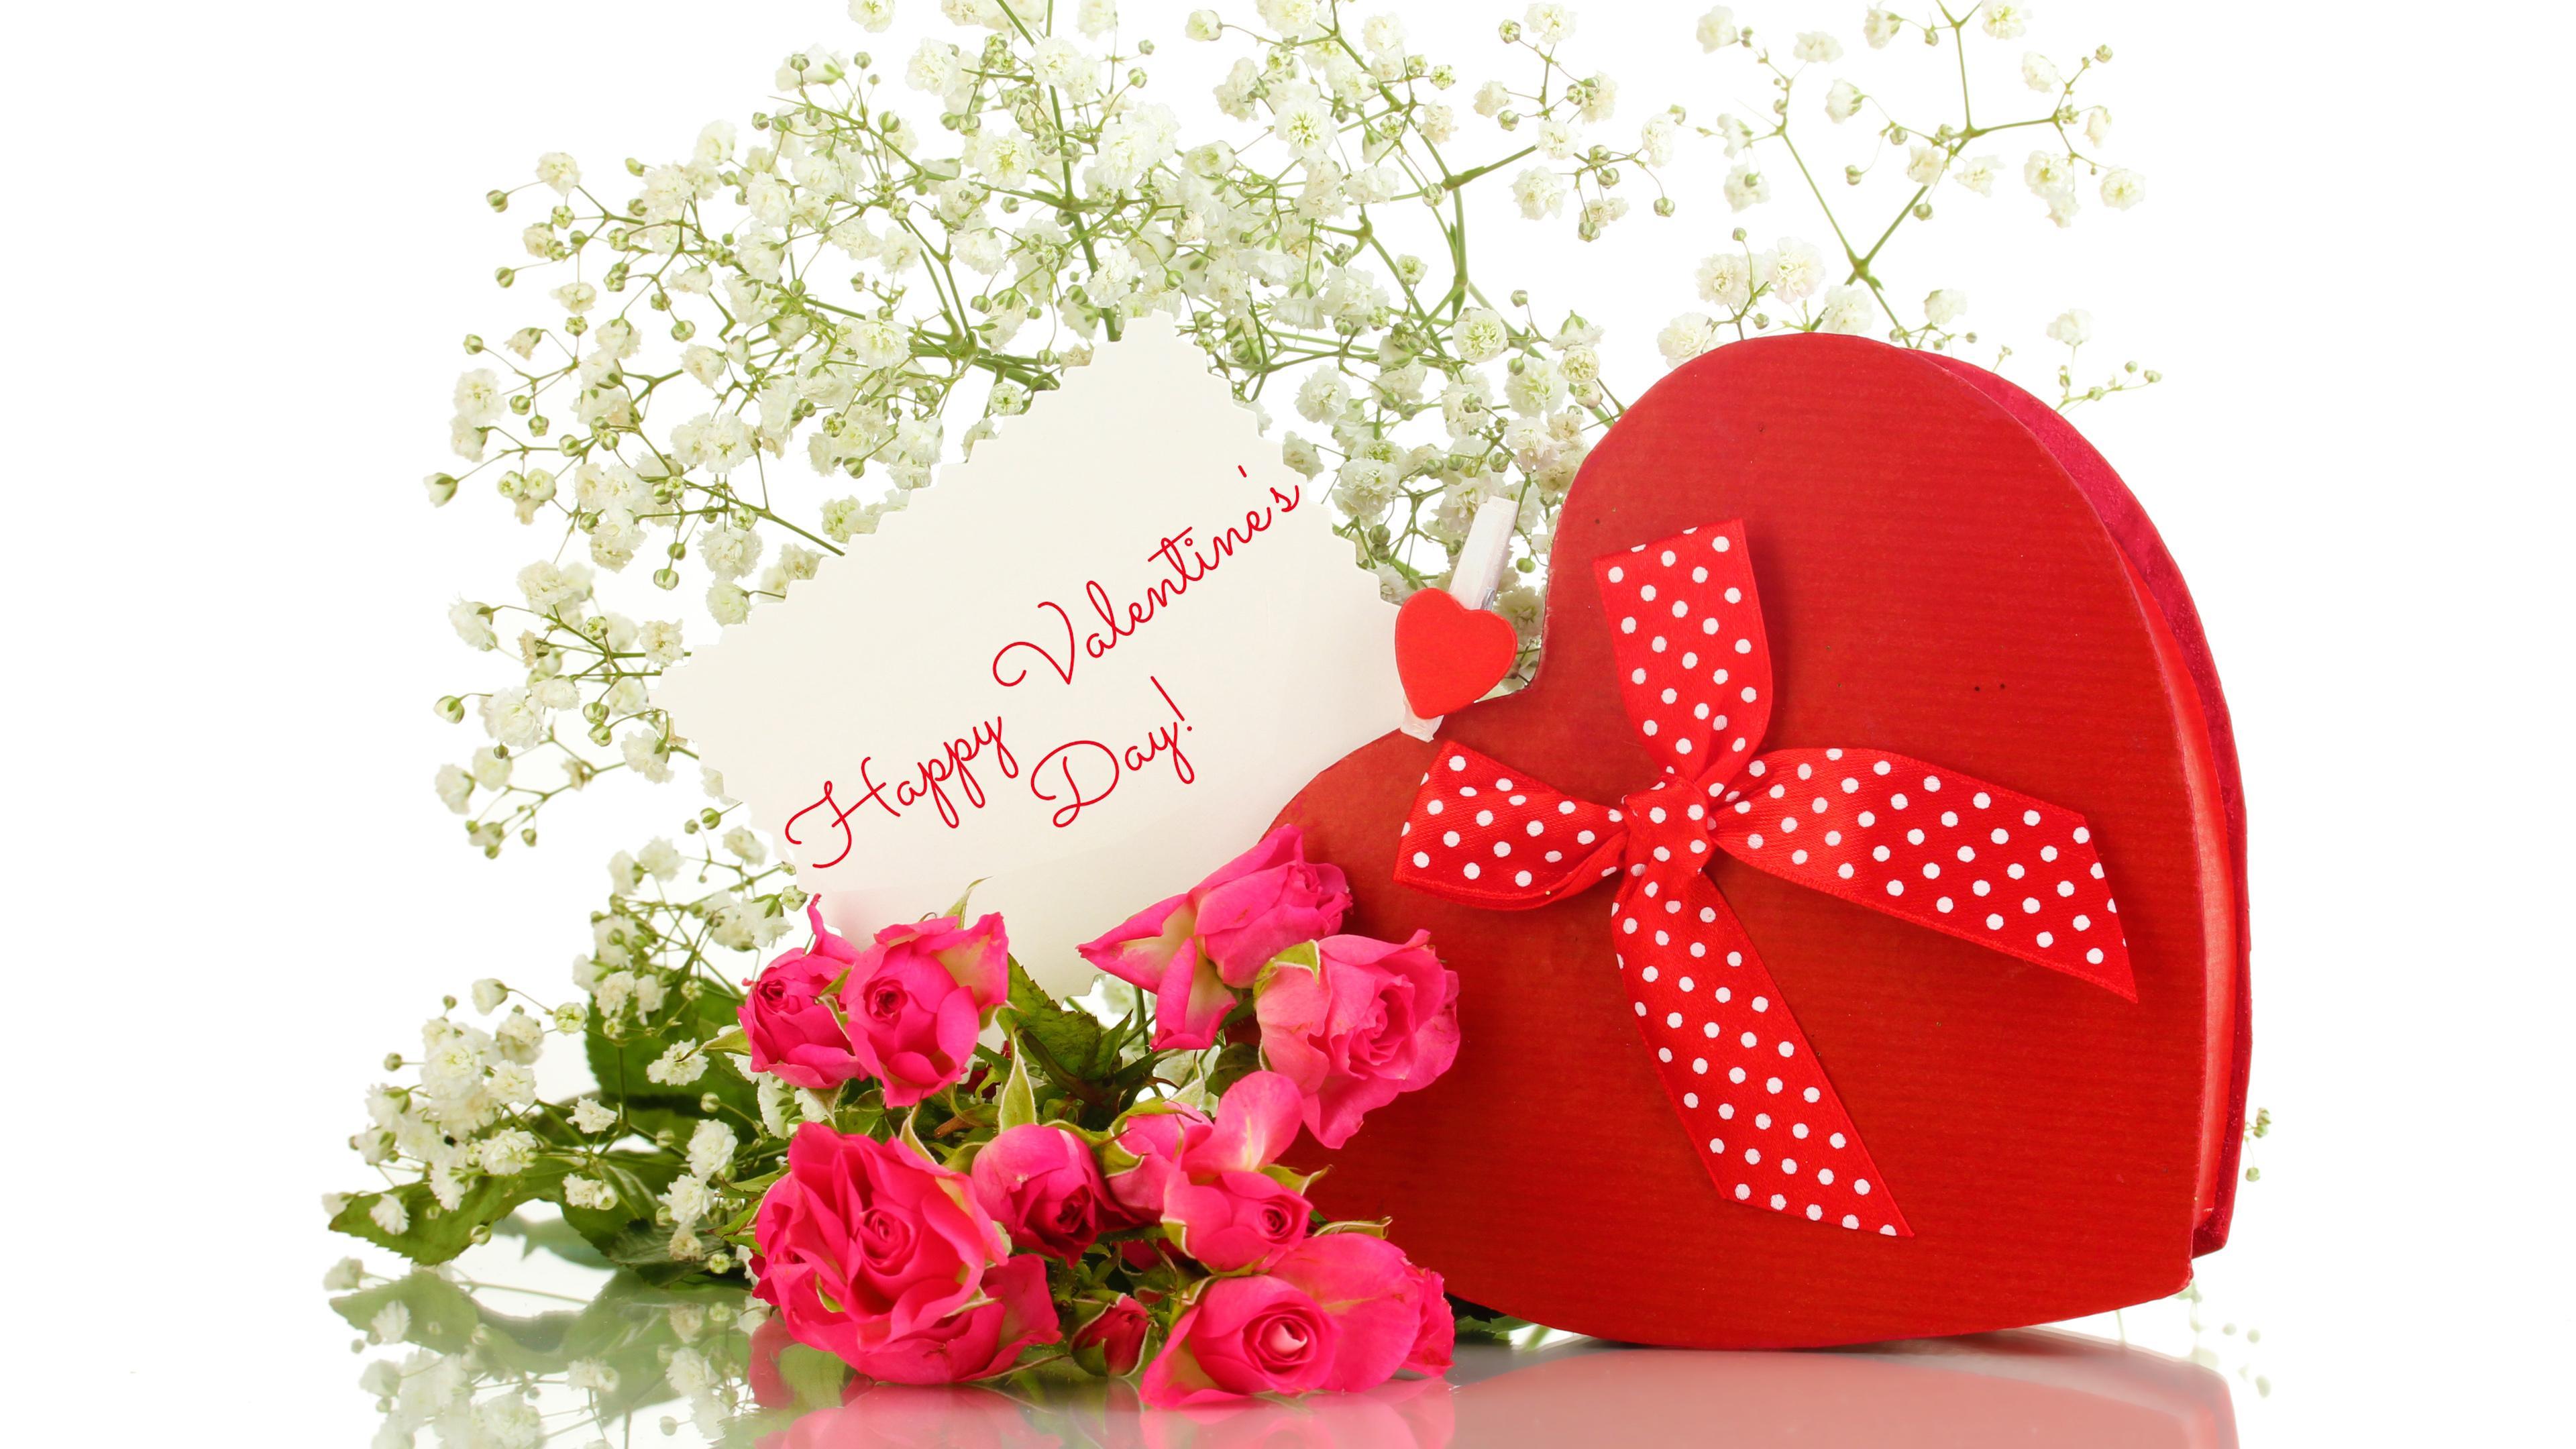 Happy Valentine's Day Giftbox and Flowers 4k Wallpaper